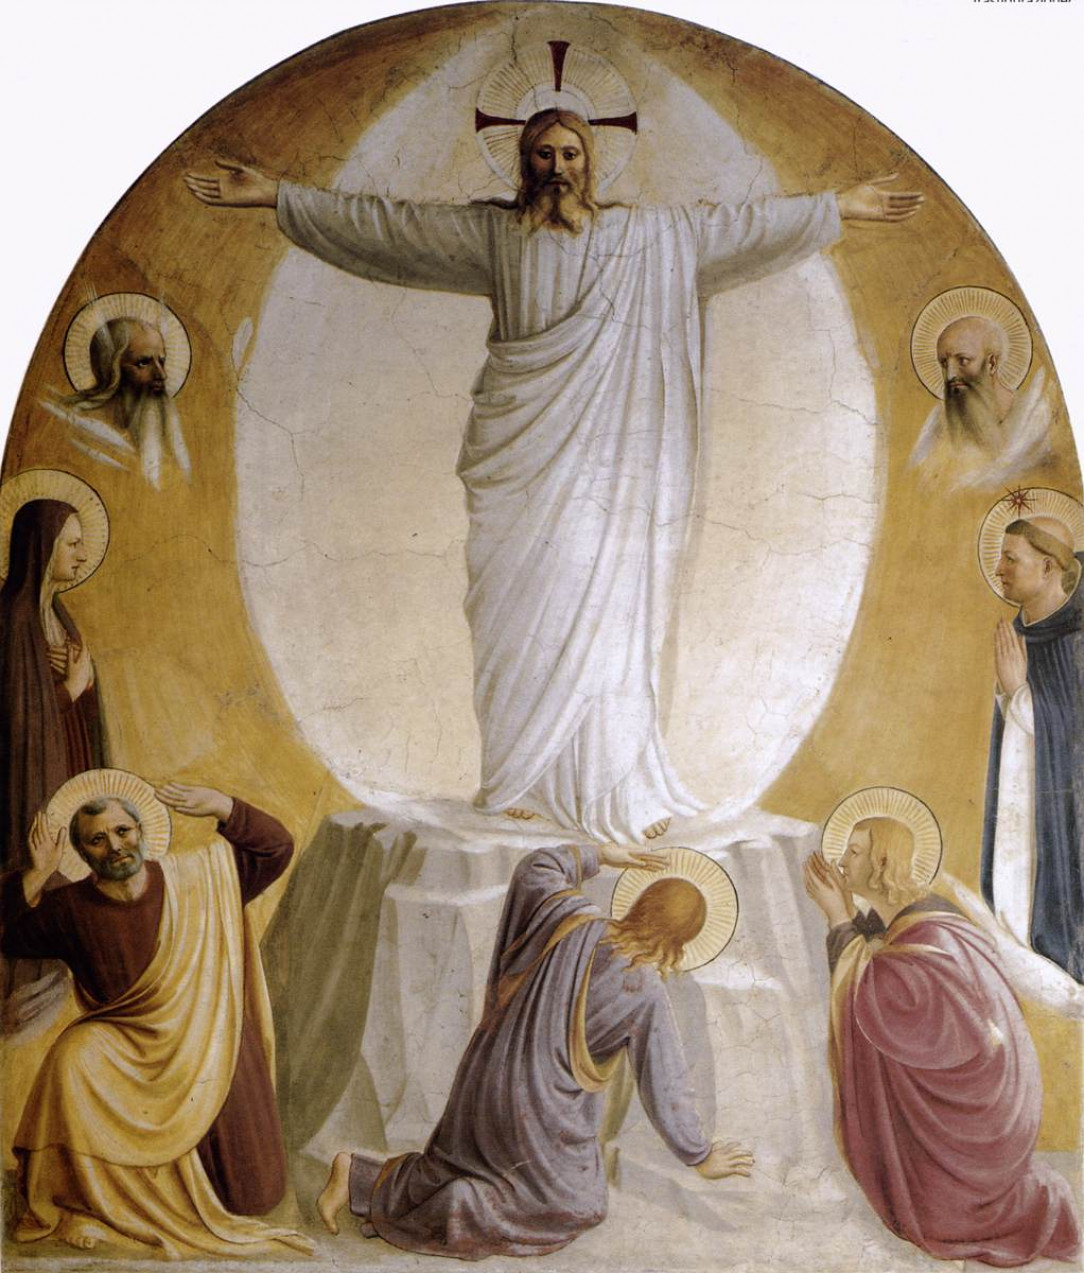 The Transfiguration of Jesus by Fra Angelico